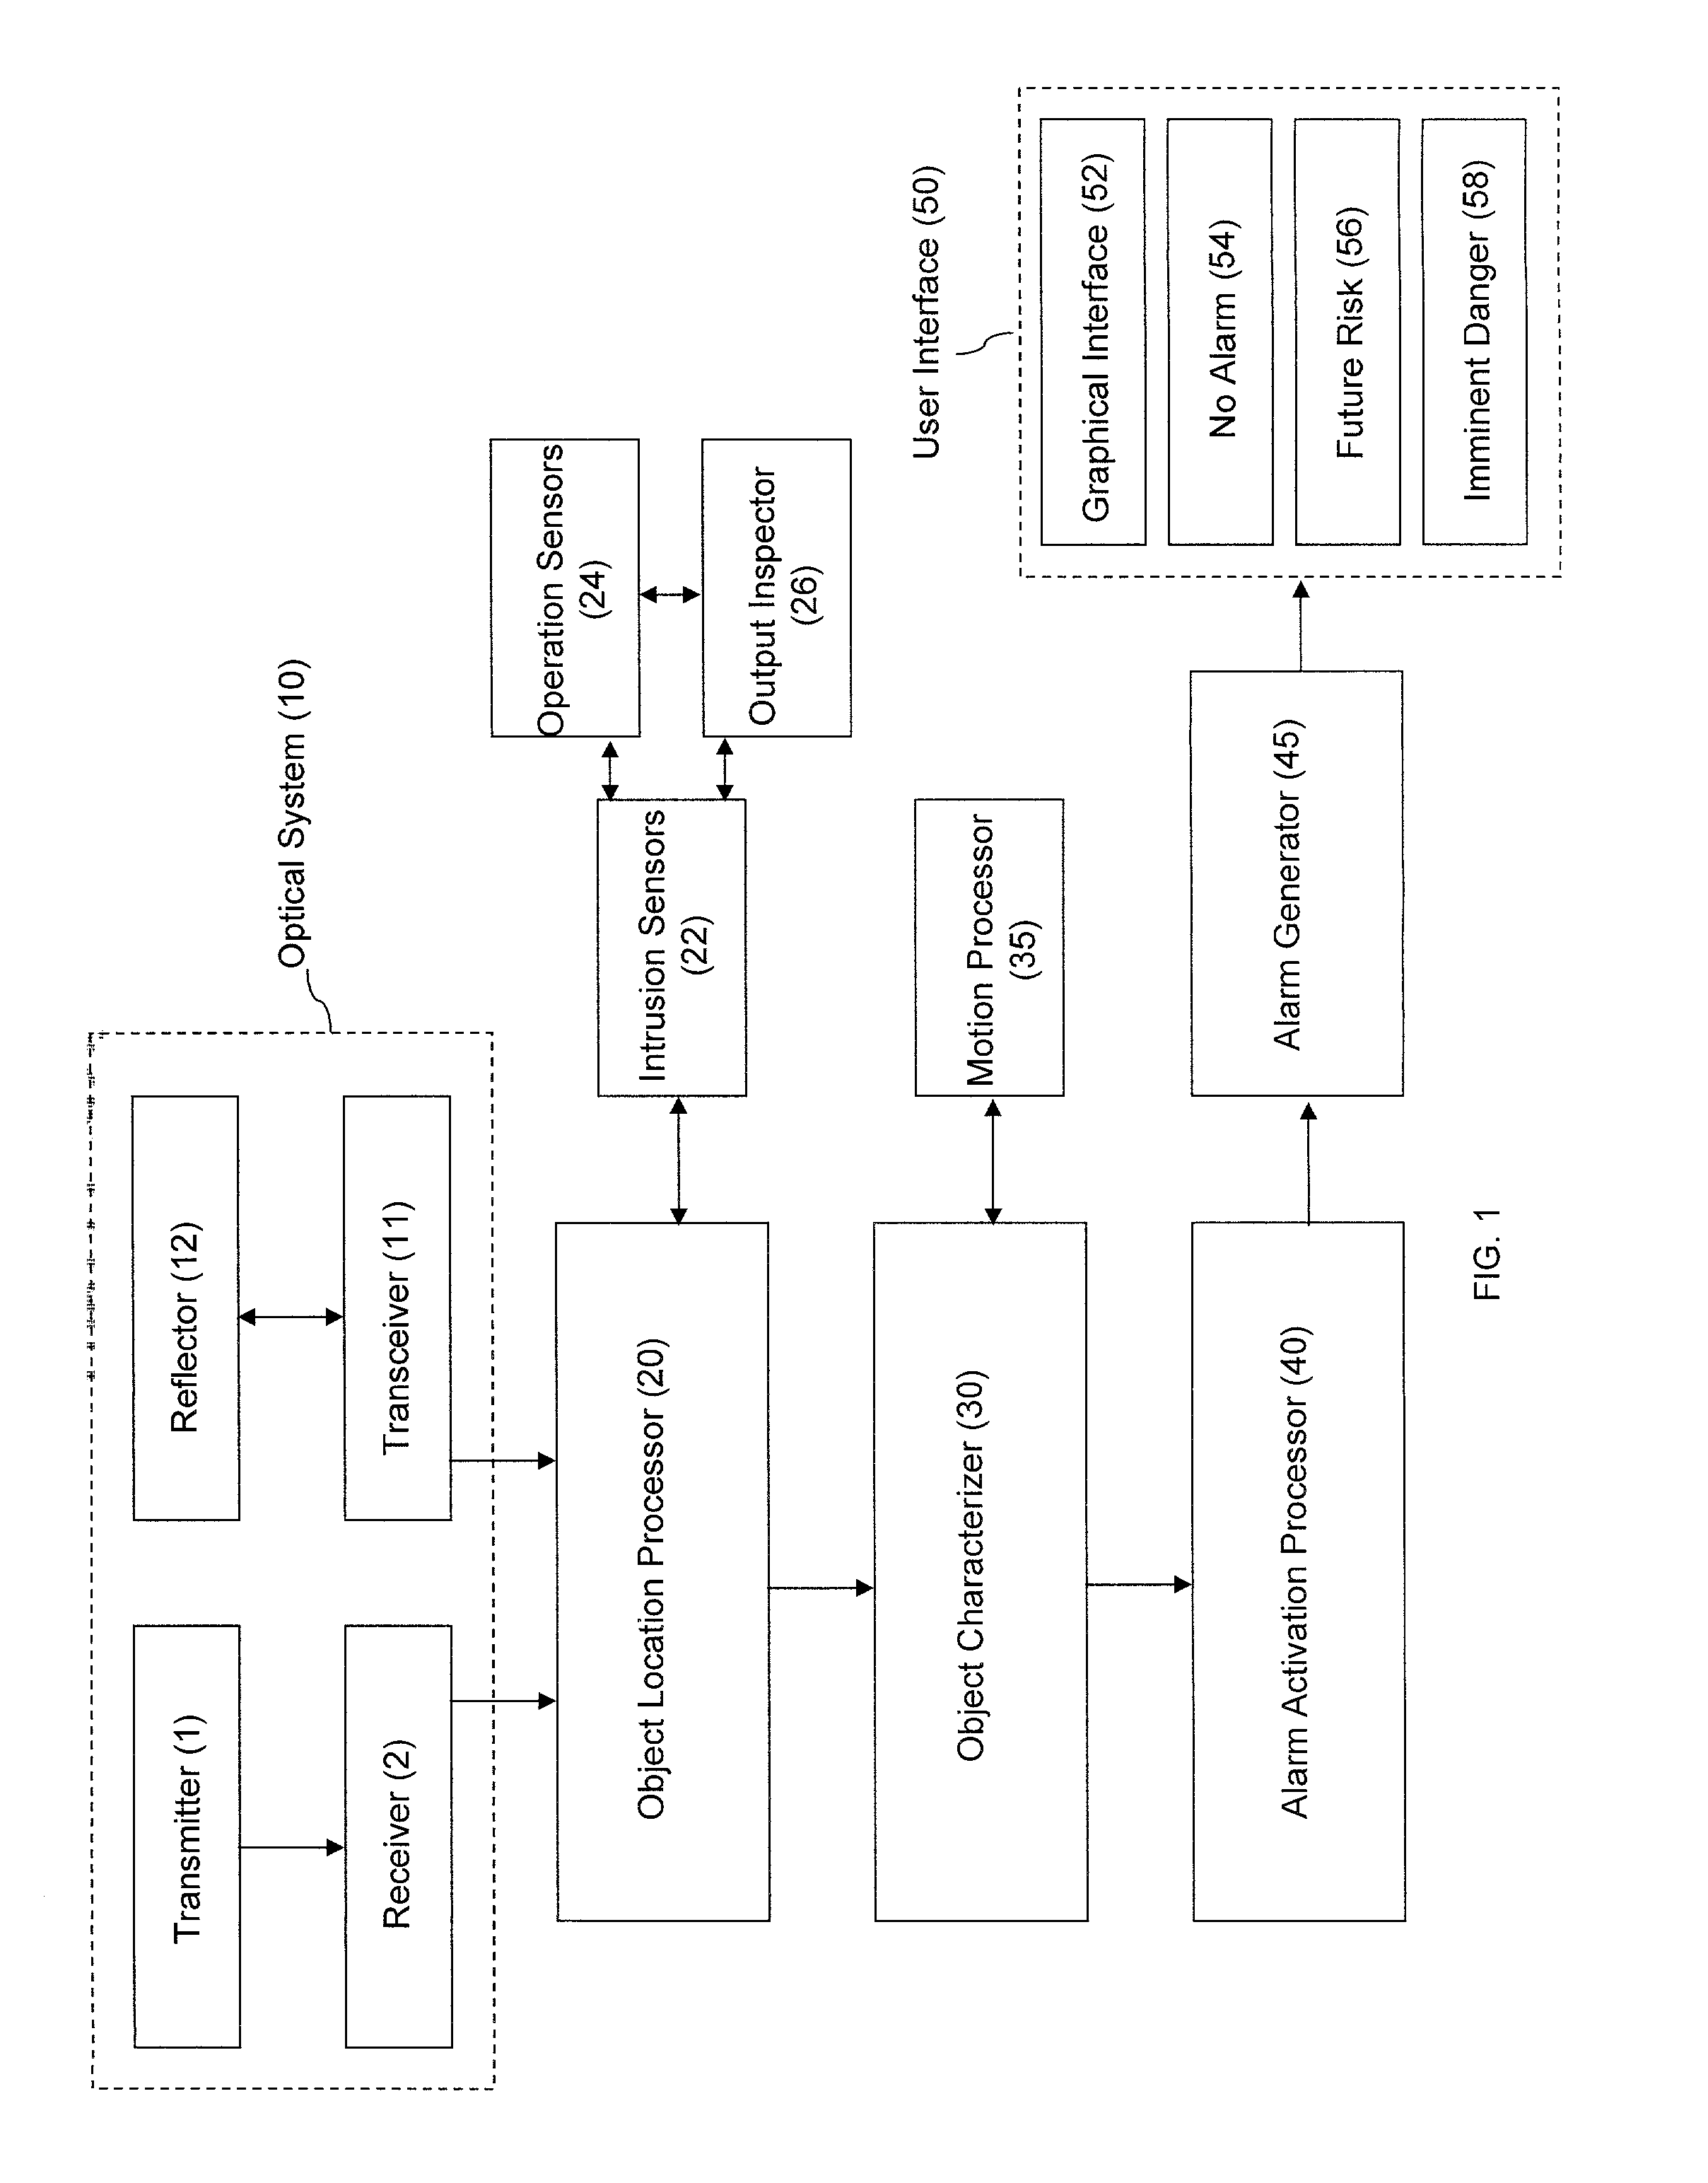 Apparatus and method for detecting objects located on an airport runway